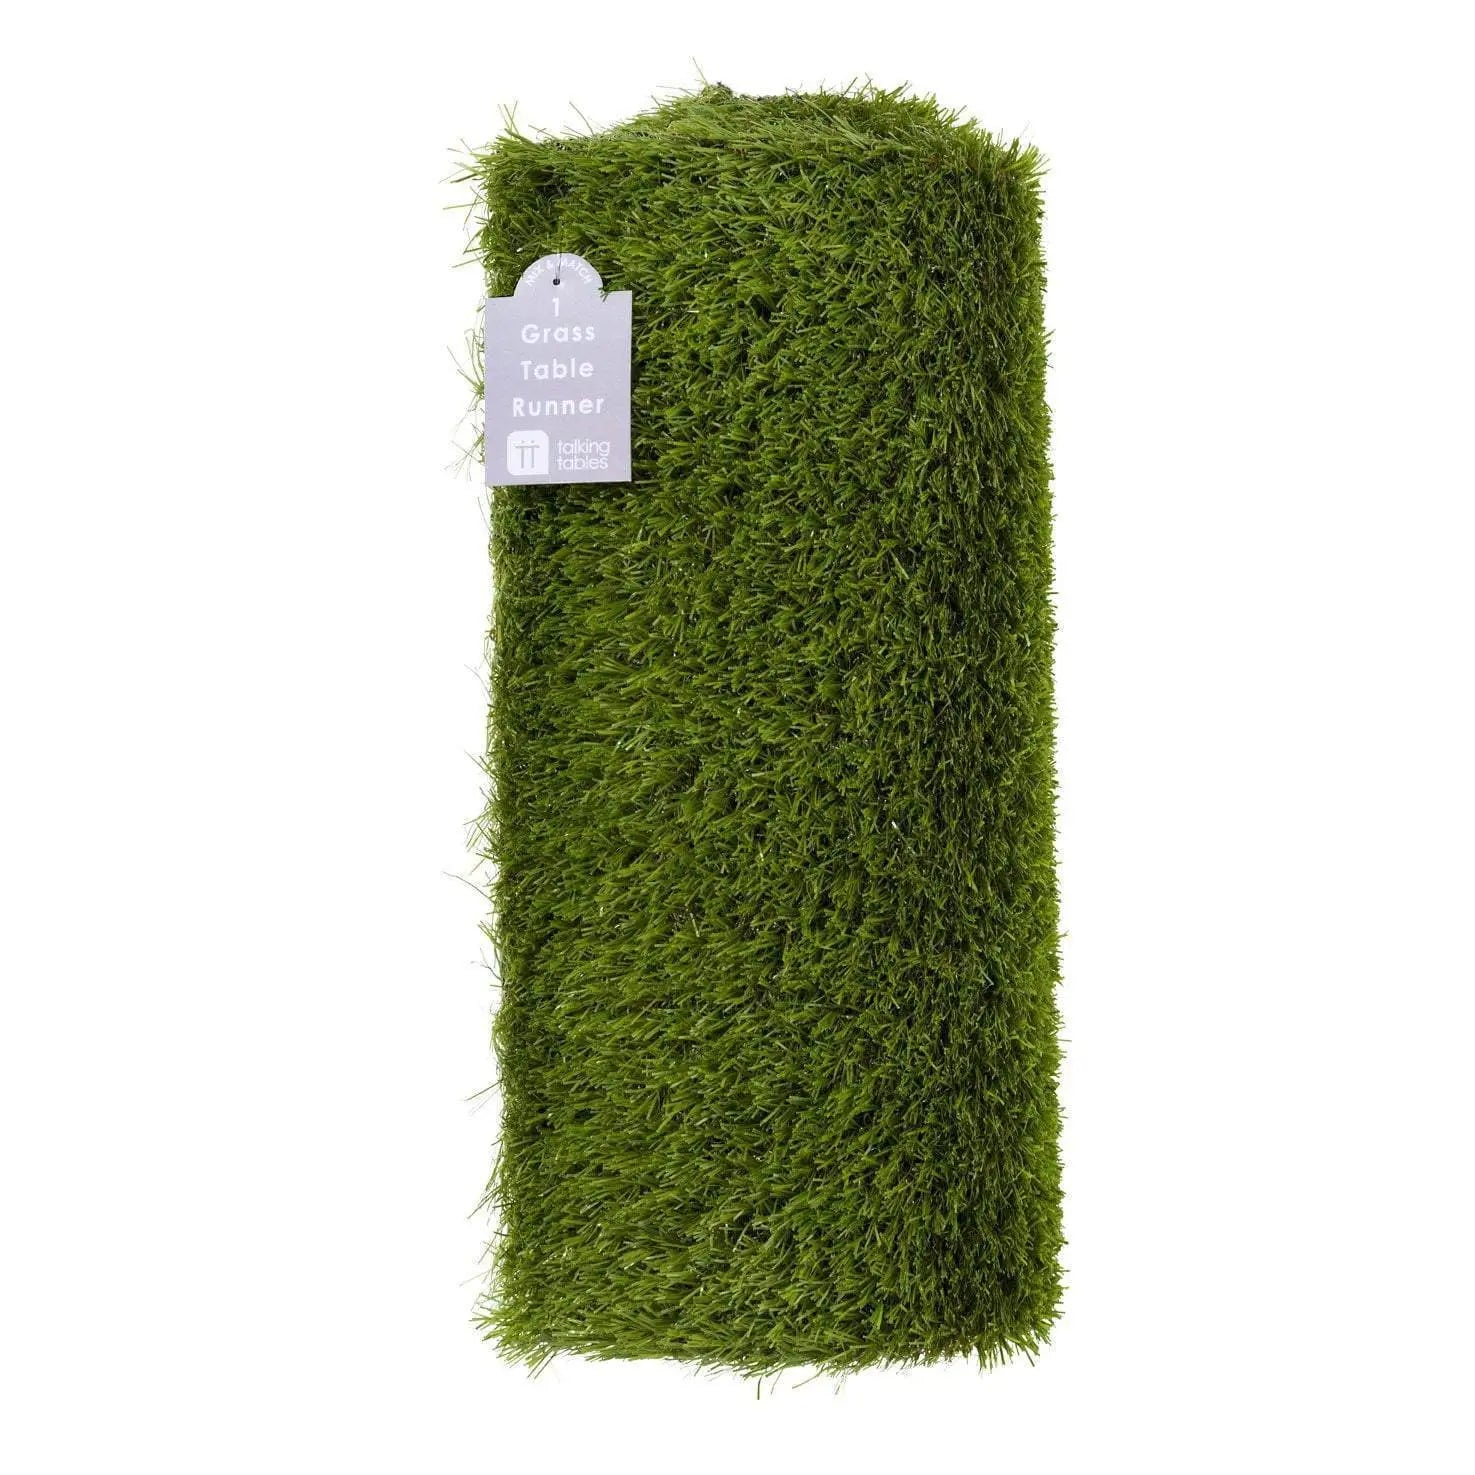 A roll of Talking Tables Artificial Grass Table Runner, resembling artificial grass, on a white background.